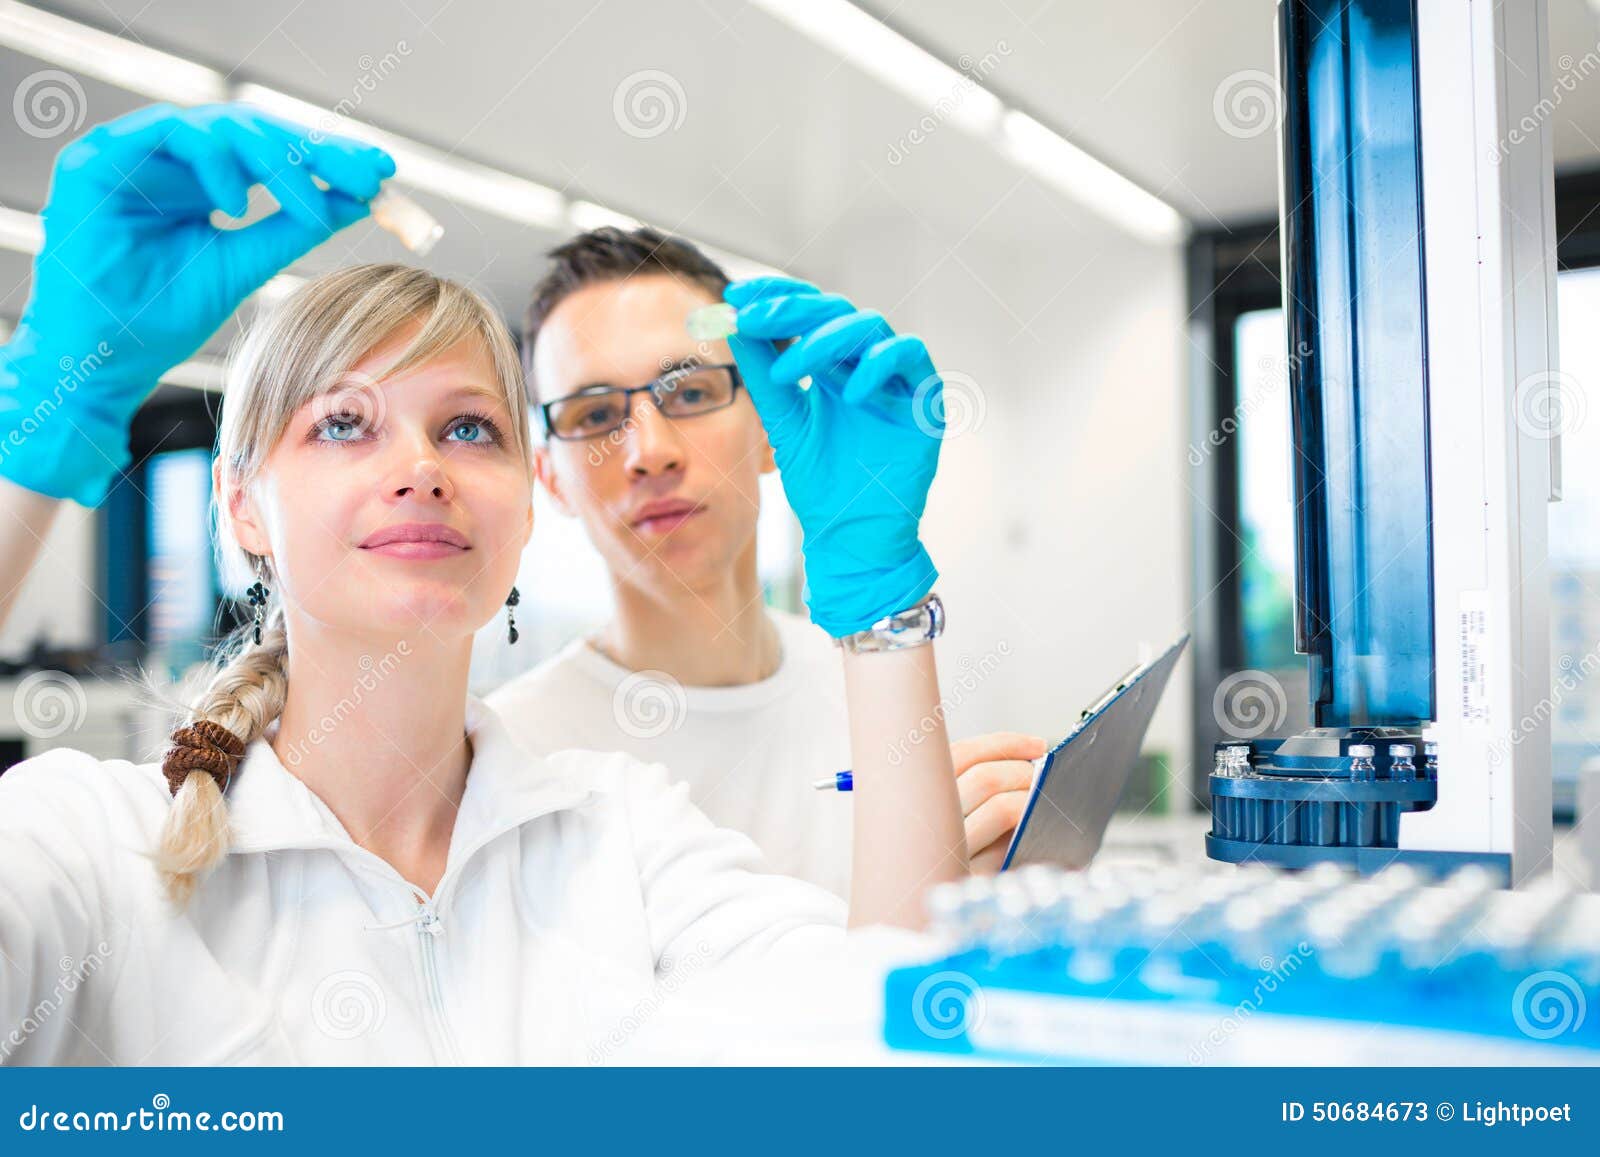 two young researchers carrying out experiments in a lab